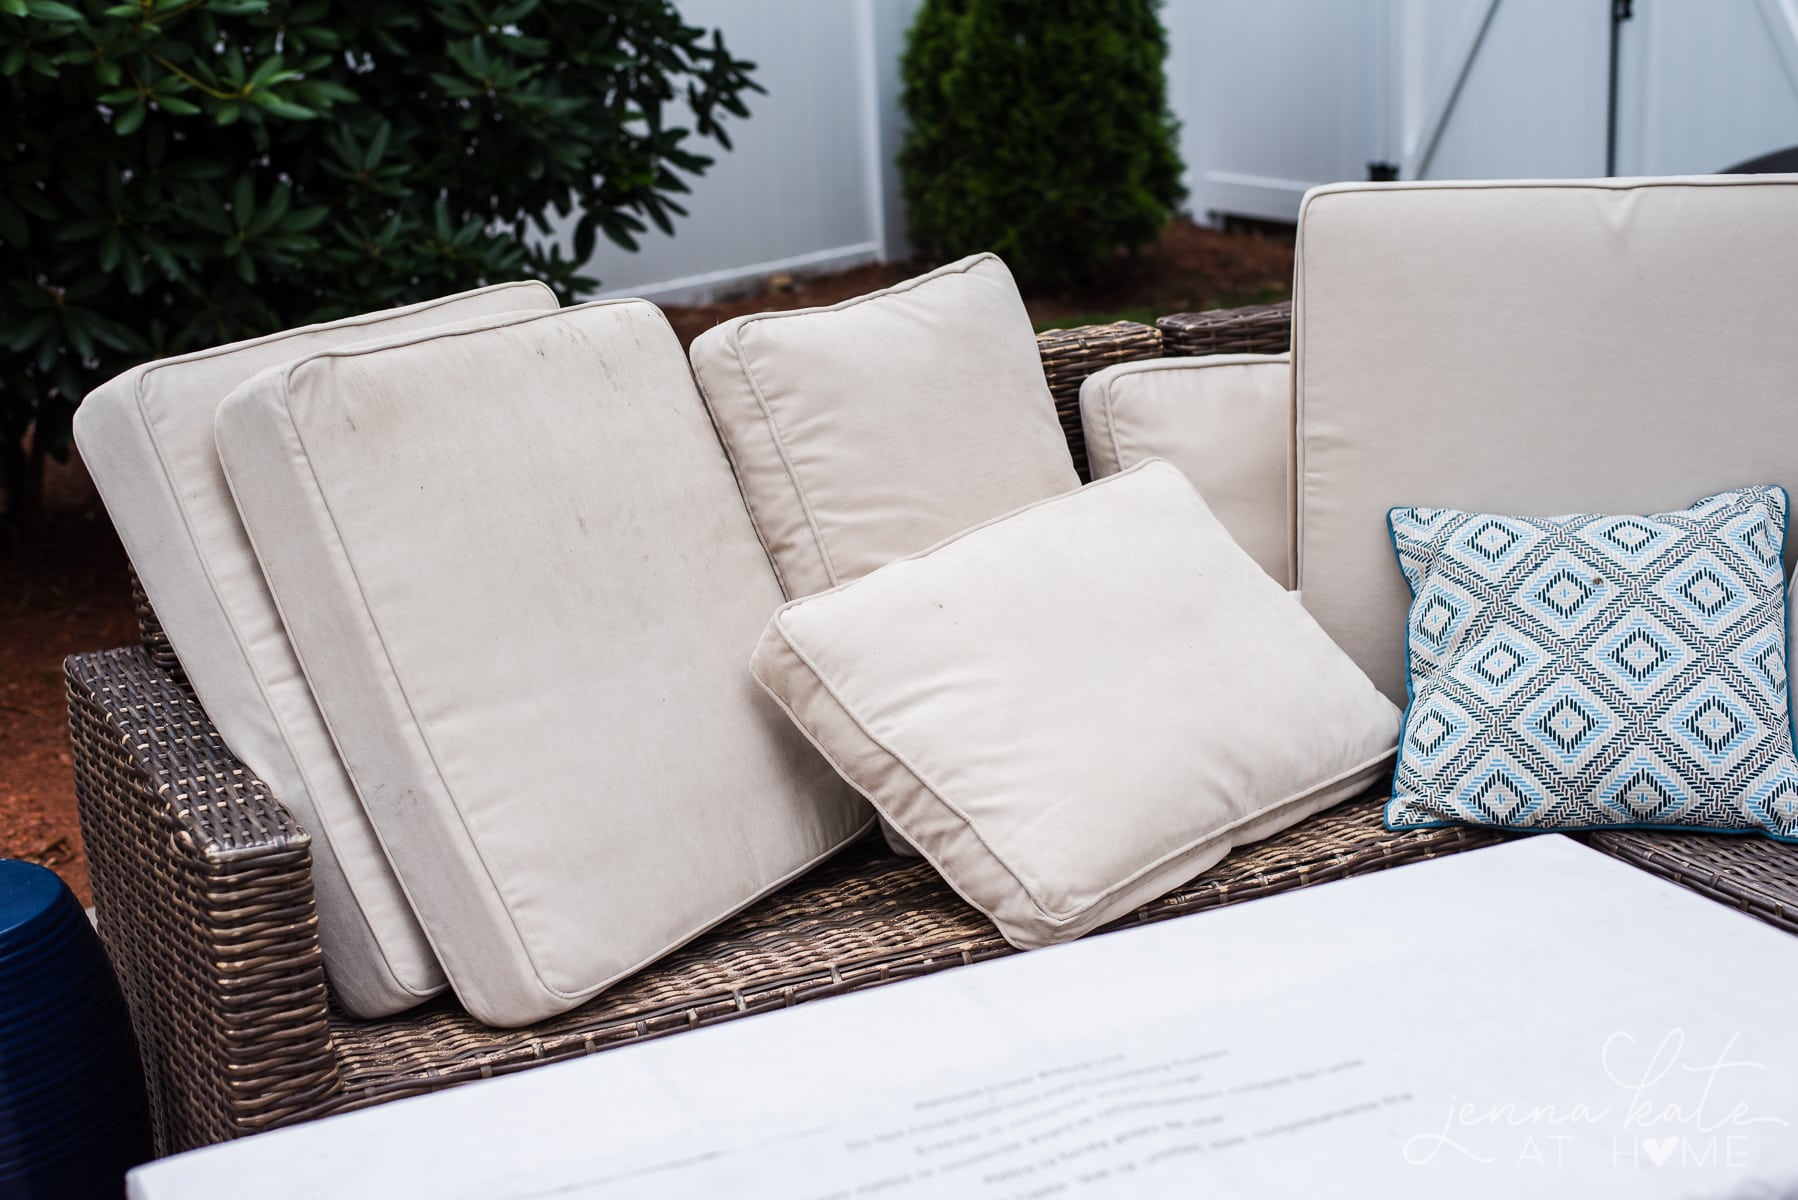 how to clean outdoor cushions - jenna kate at home